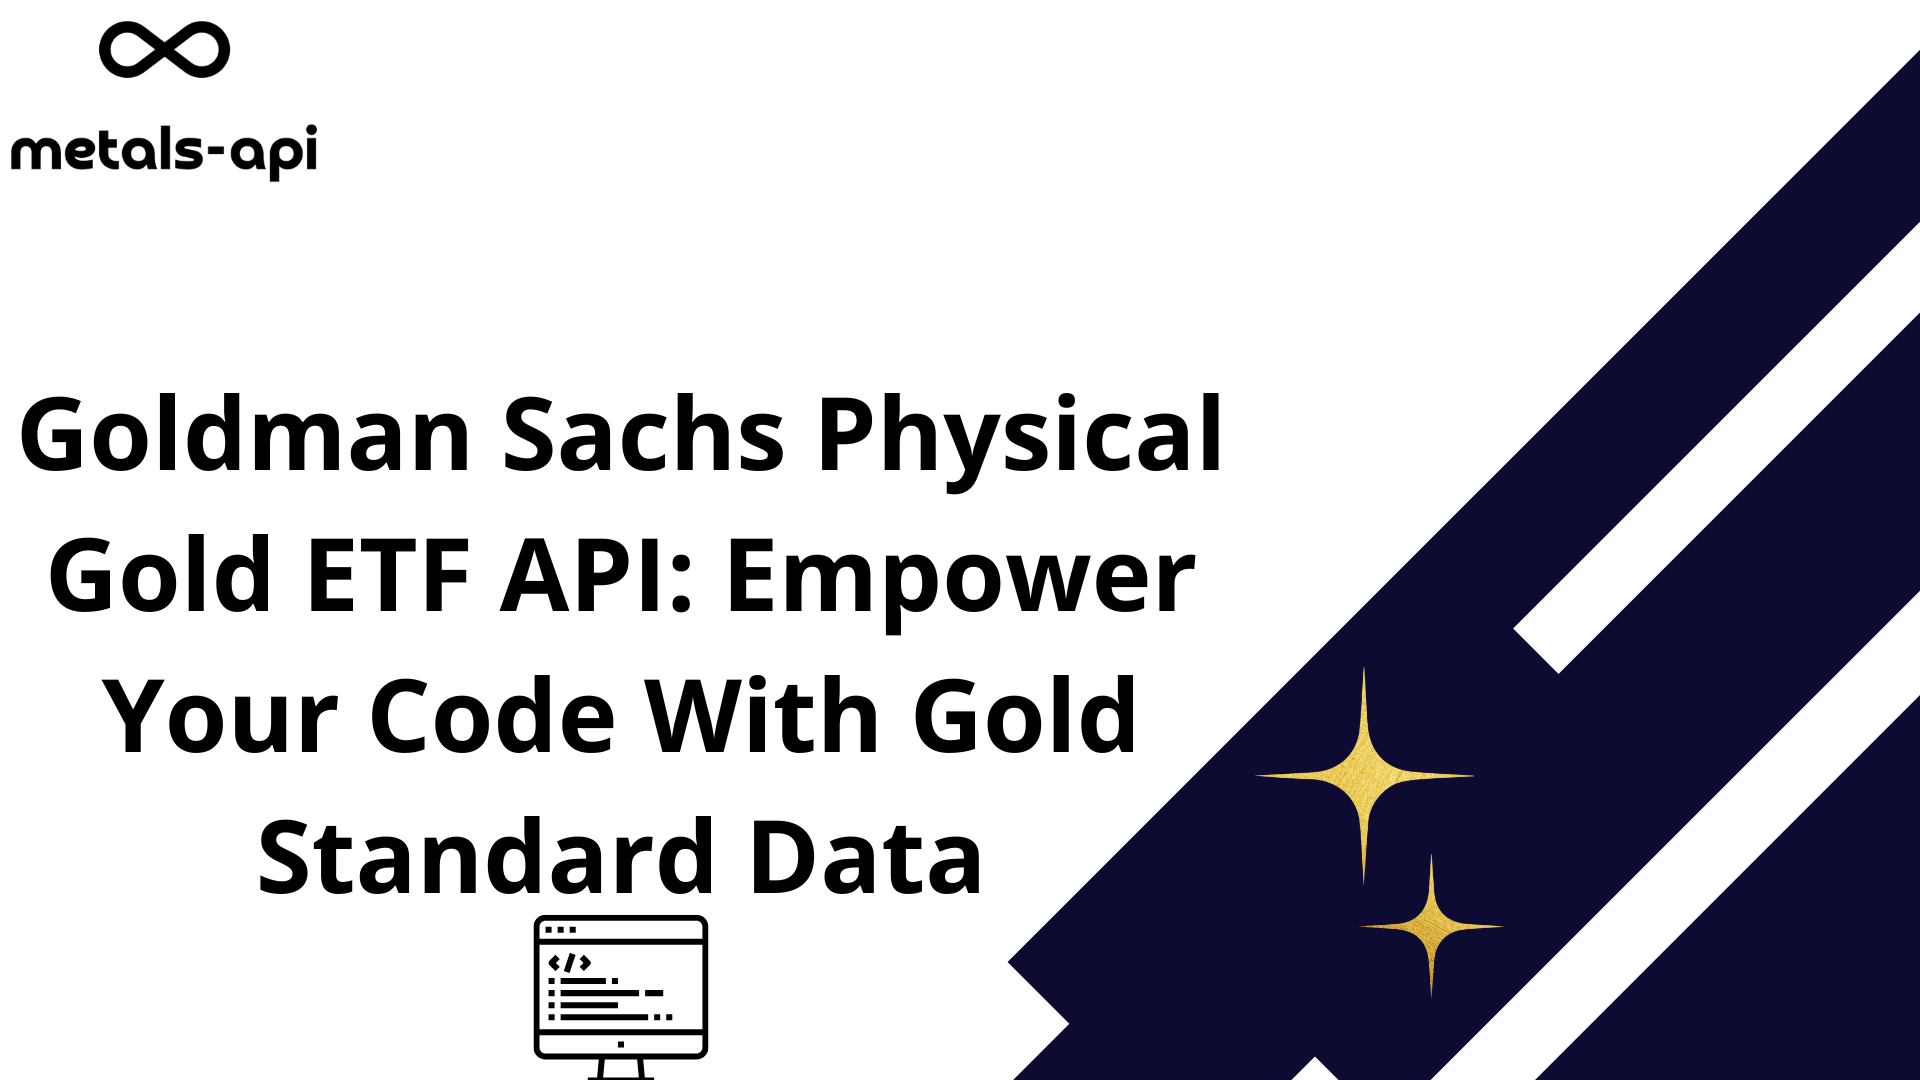 Goldman Sachs Physical Gold ETF API: Empower Your Code With Gold Standard Data